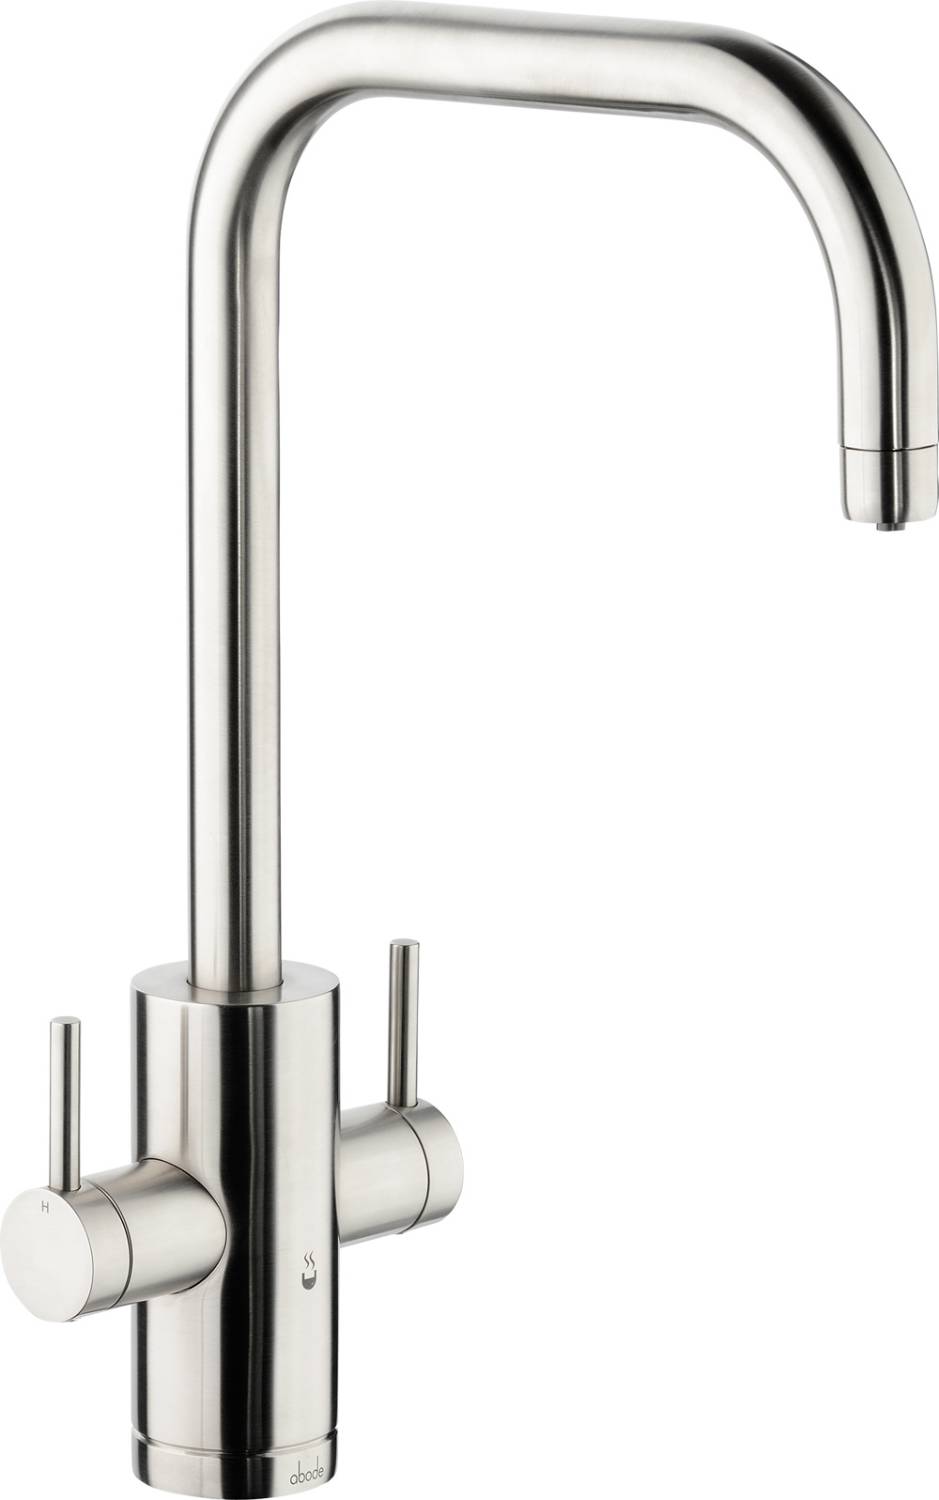 PRONTEAU™ Project Monobloc - 4 N1 Steaming Hot Water Tap